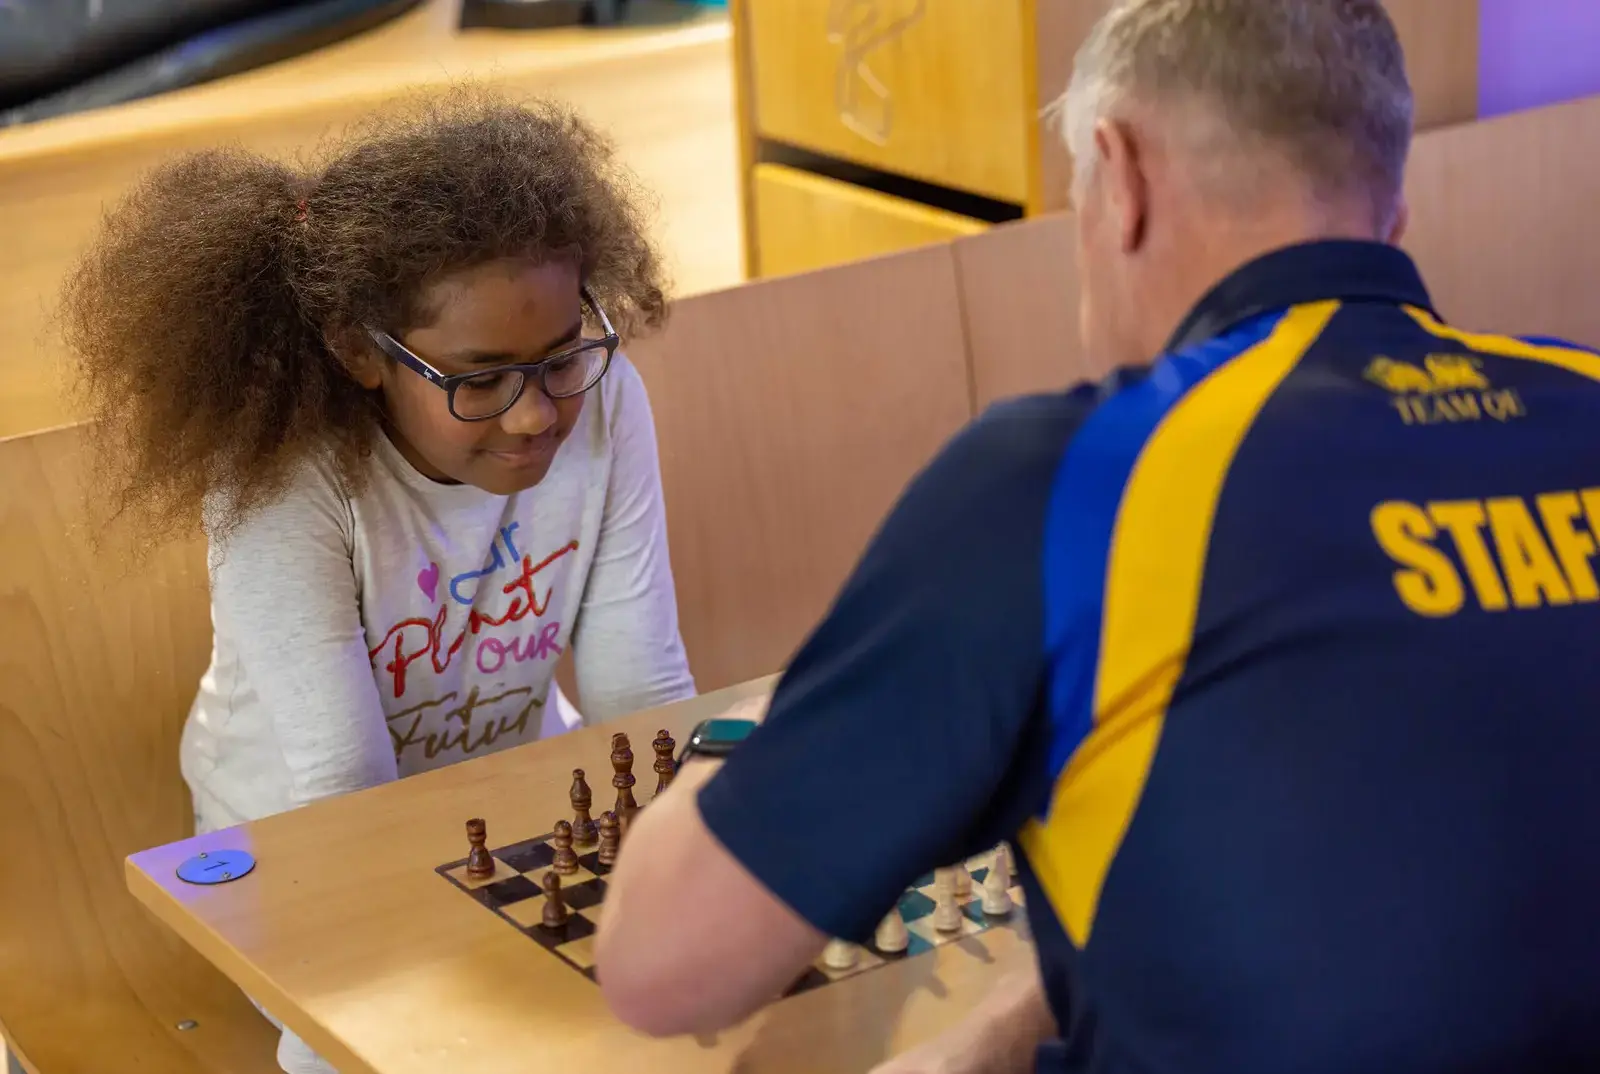 Chapter House pupil playing chess with a teacher